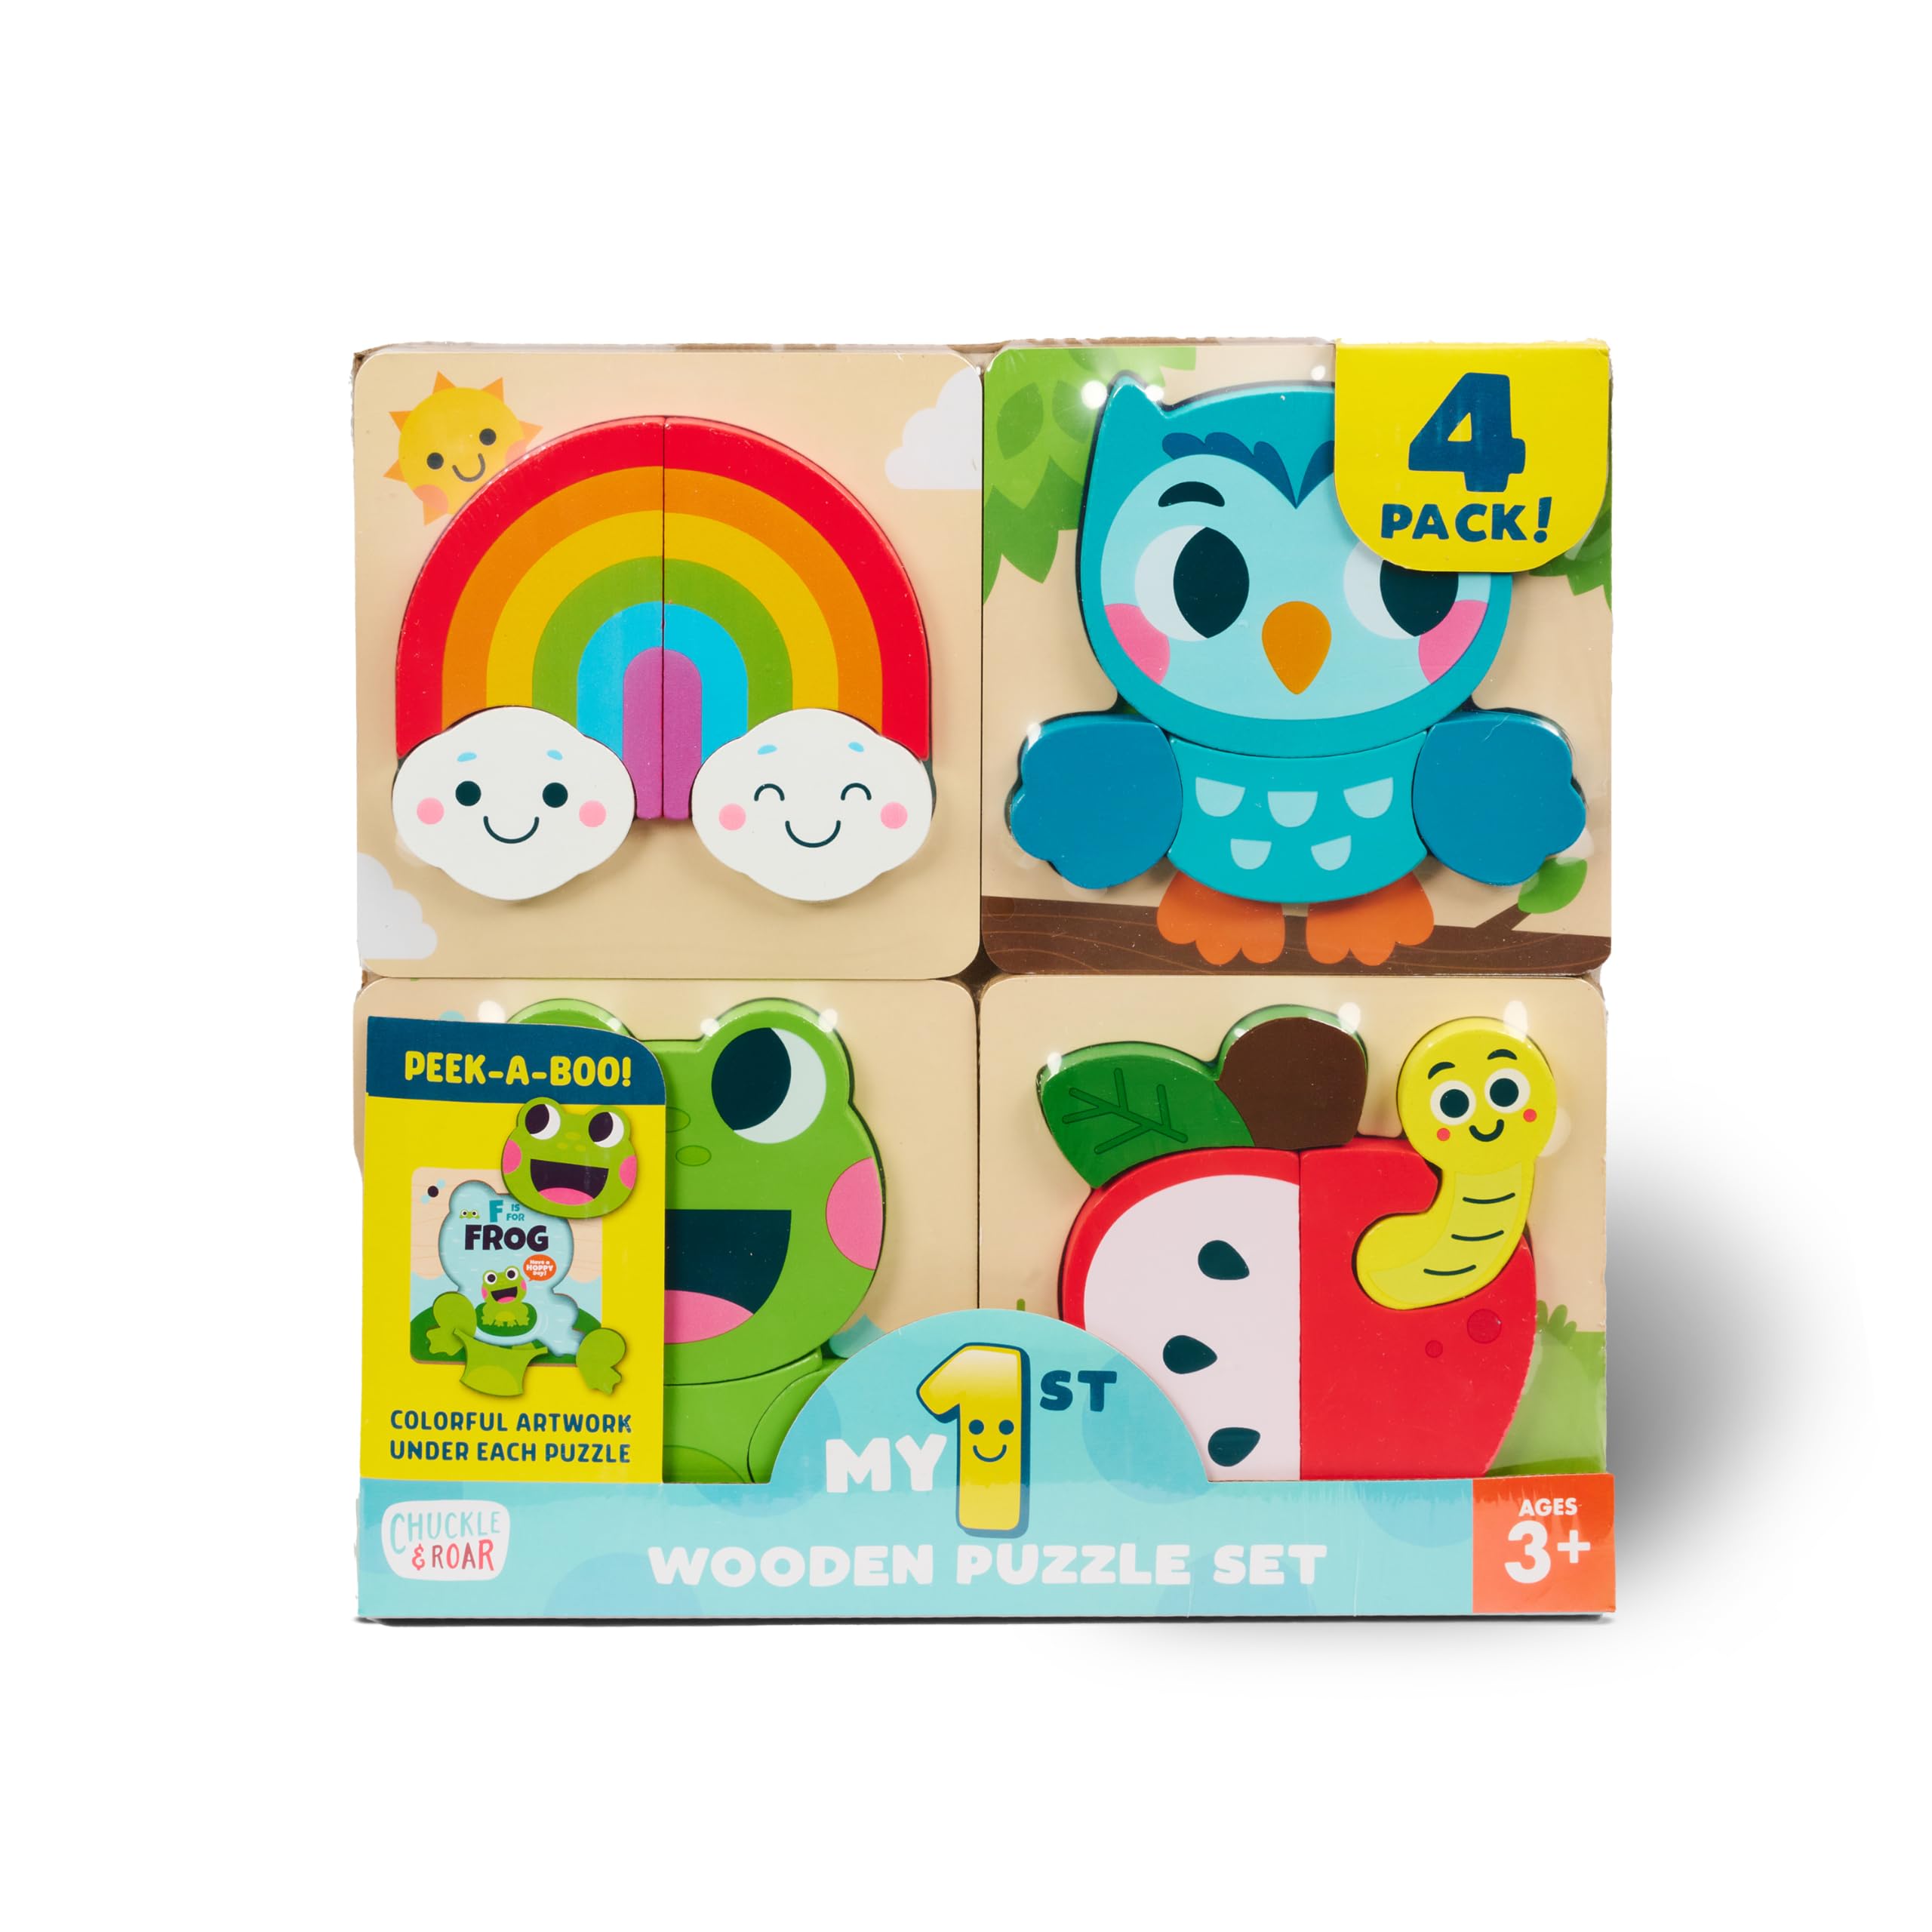 Chuckle & Roar - My 1st Wooden Puzzle Set - 4 Pack of Colorful Images - Apple, Frog, Rainbow, and Owl Characters - Educational for Preschoolers - Ages 3 and Up